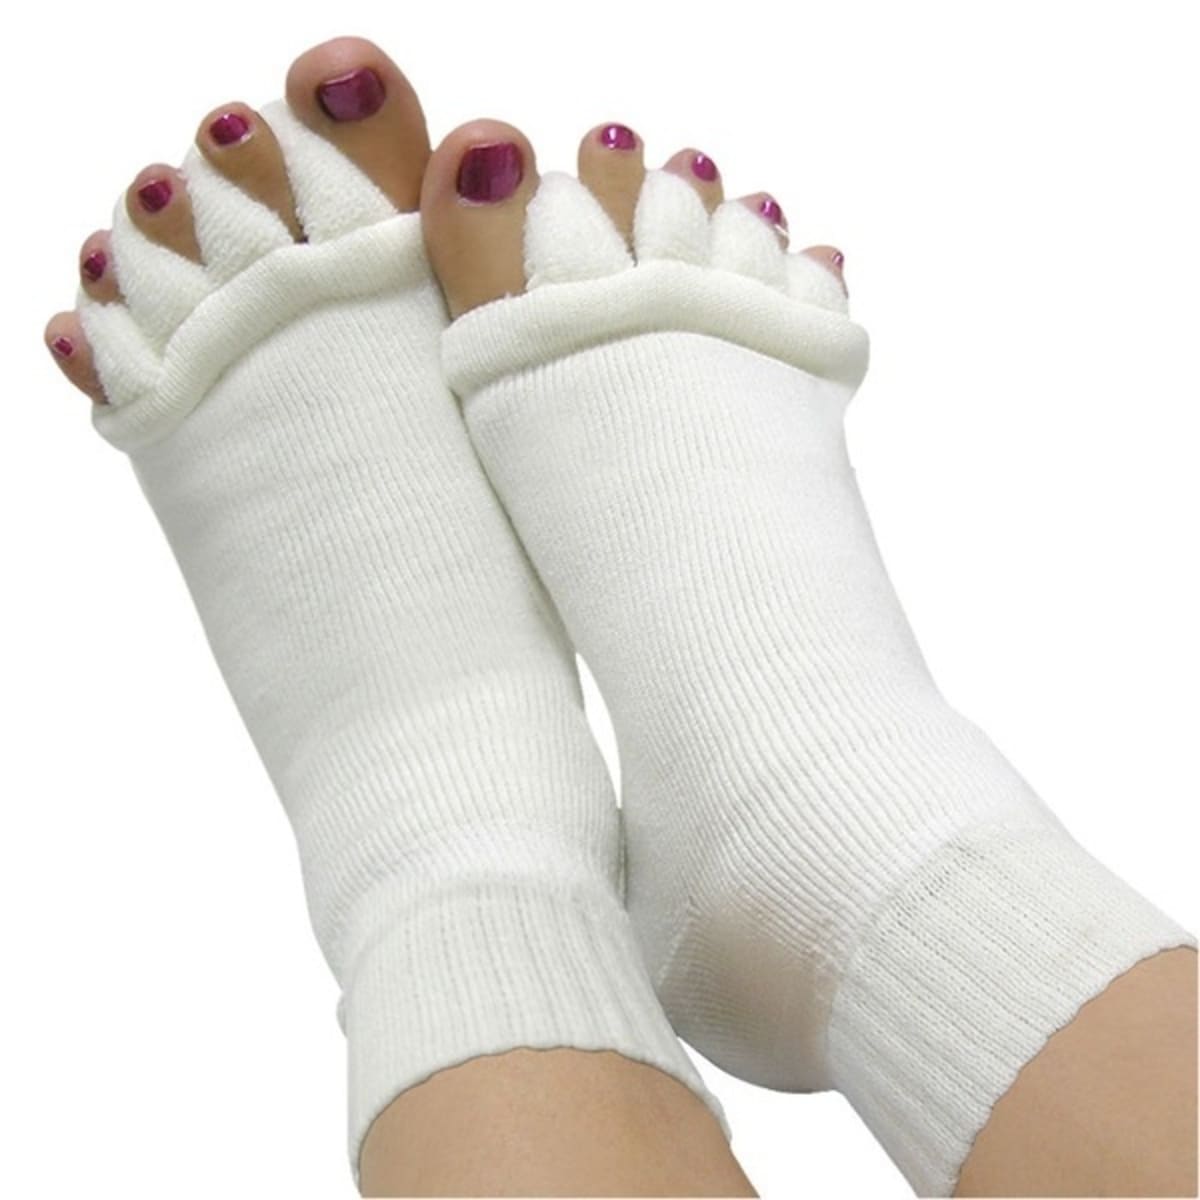 soft & Beautiful Comfy Toes Foot Alignment Socks Toe Spacer